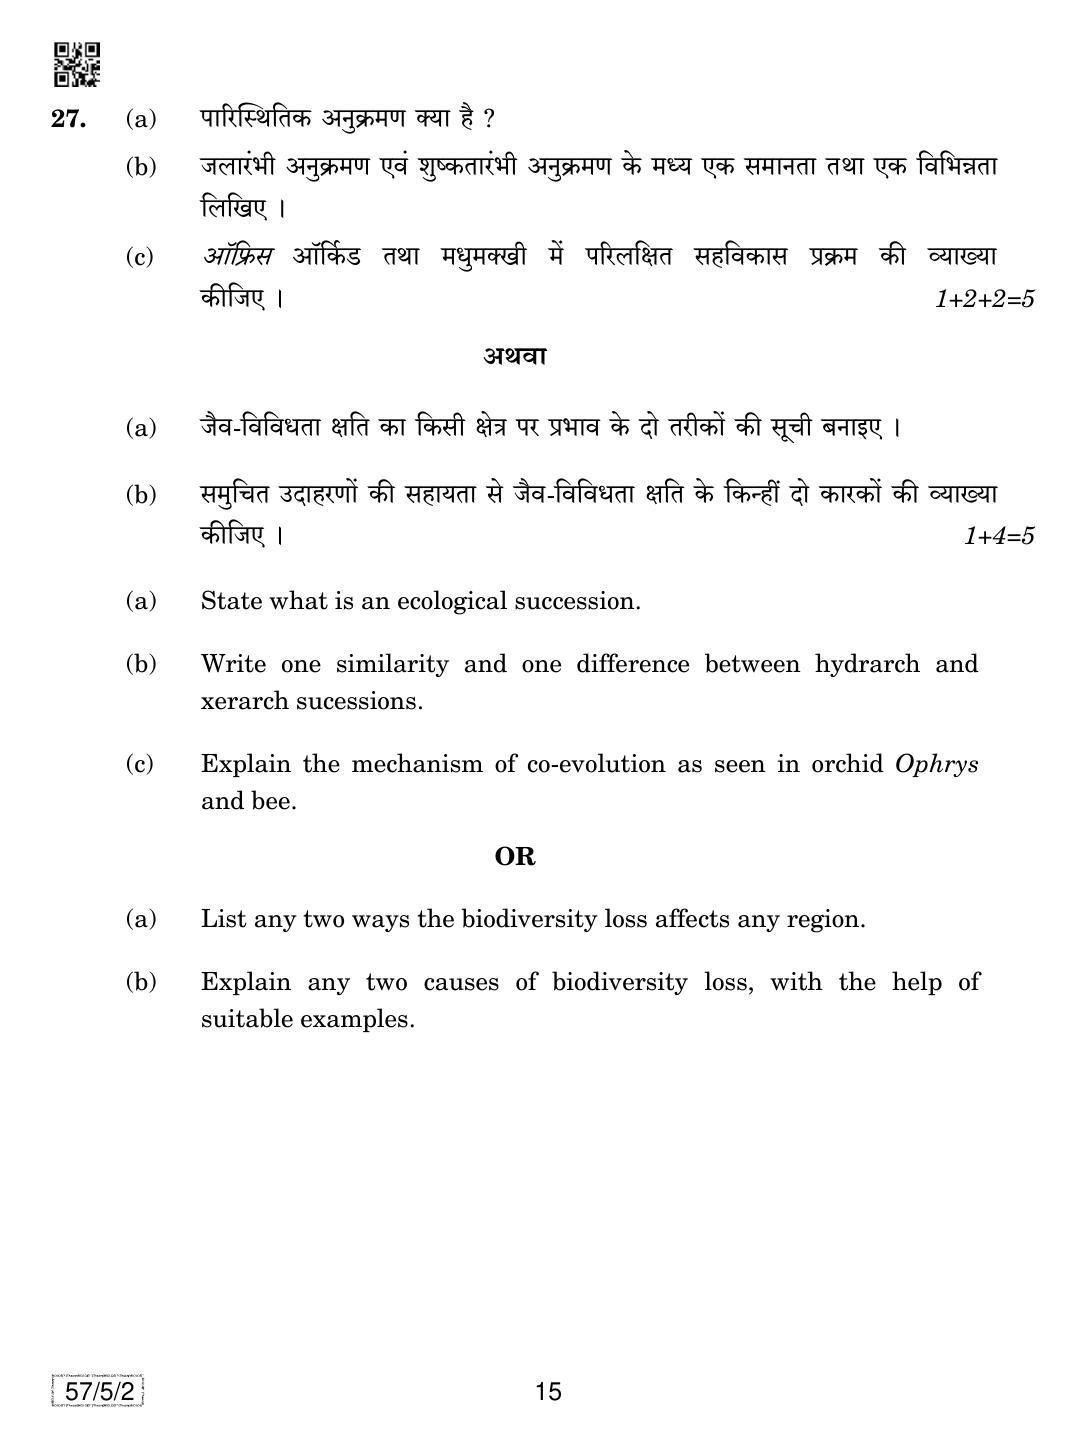 CBSE Class 12 57-5-2 Biology 2019 Question Paper - Page 15